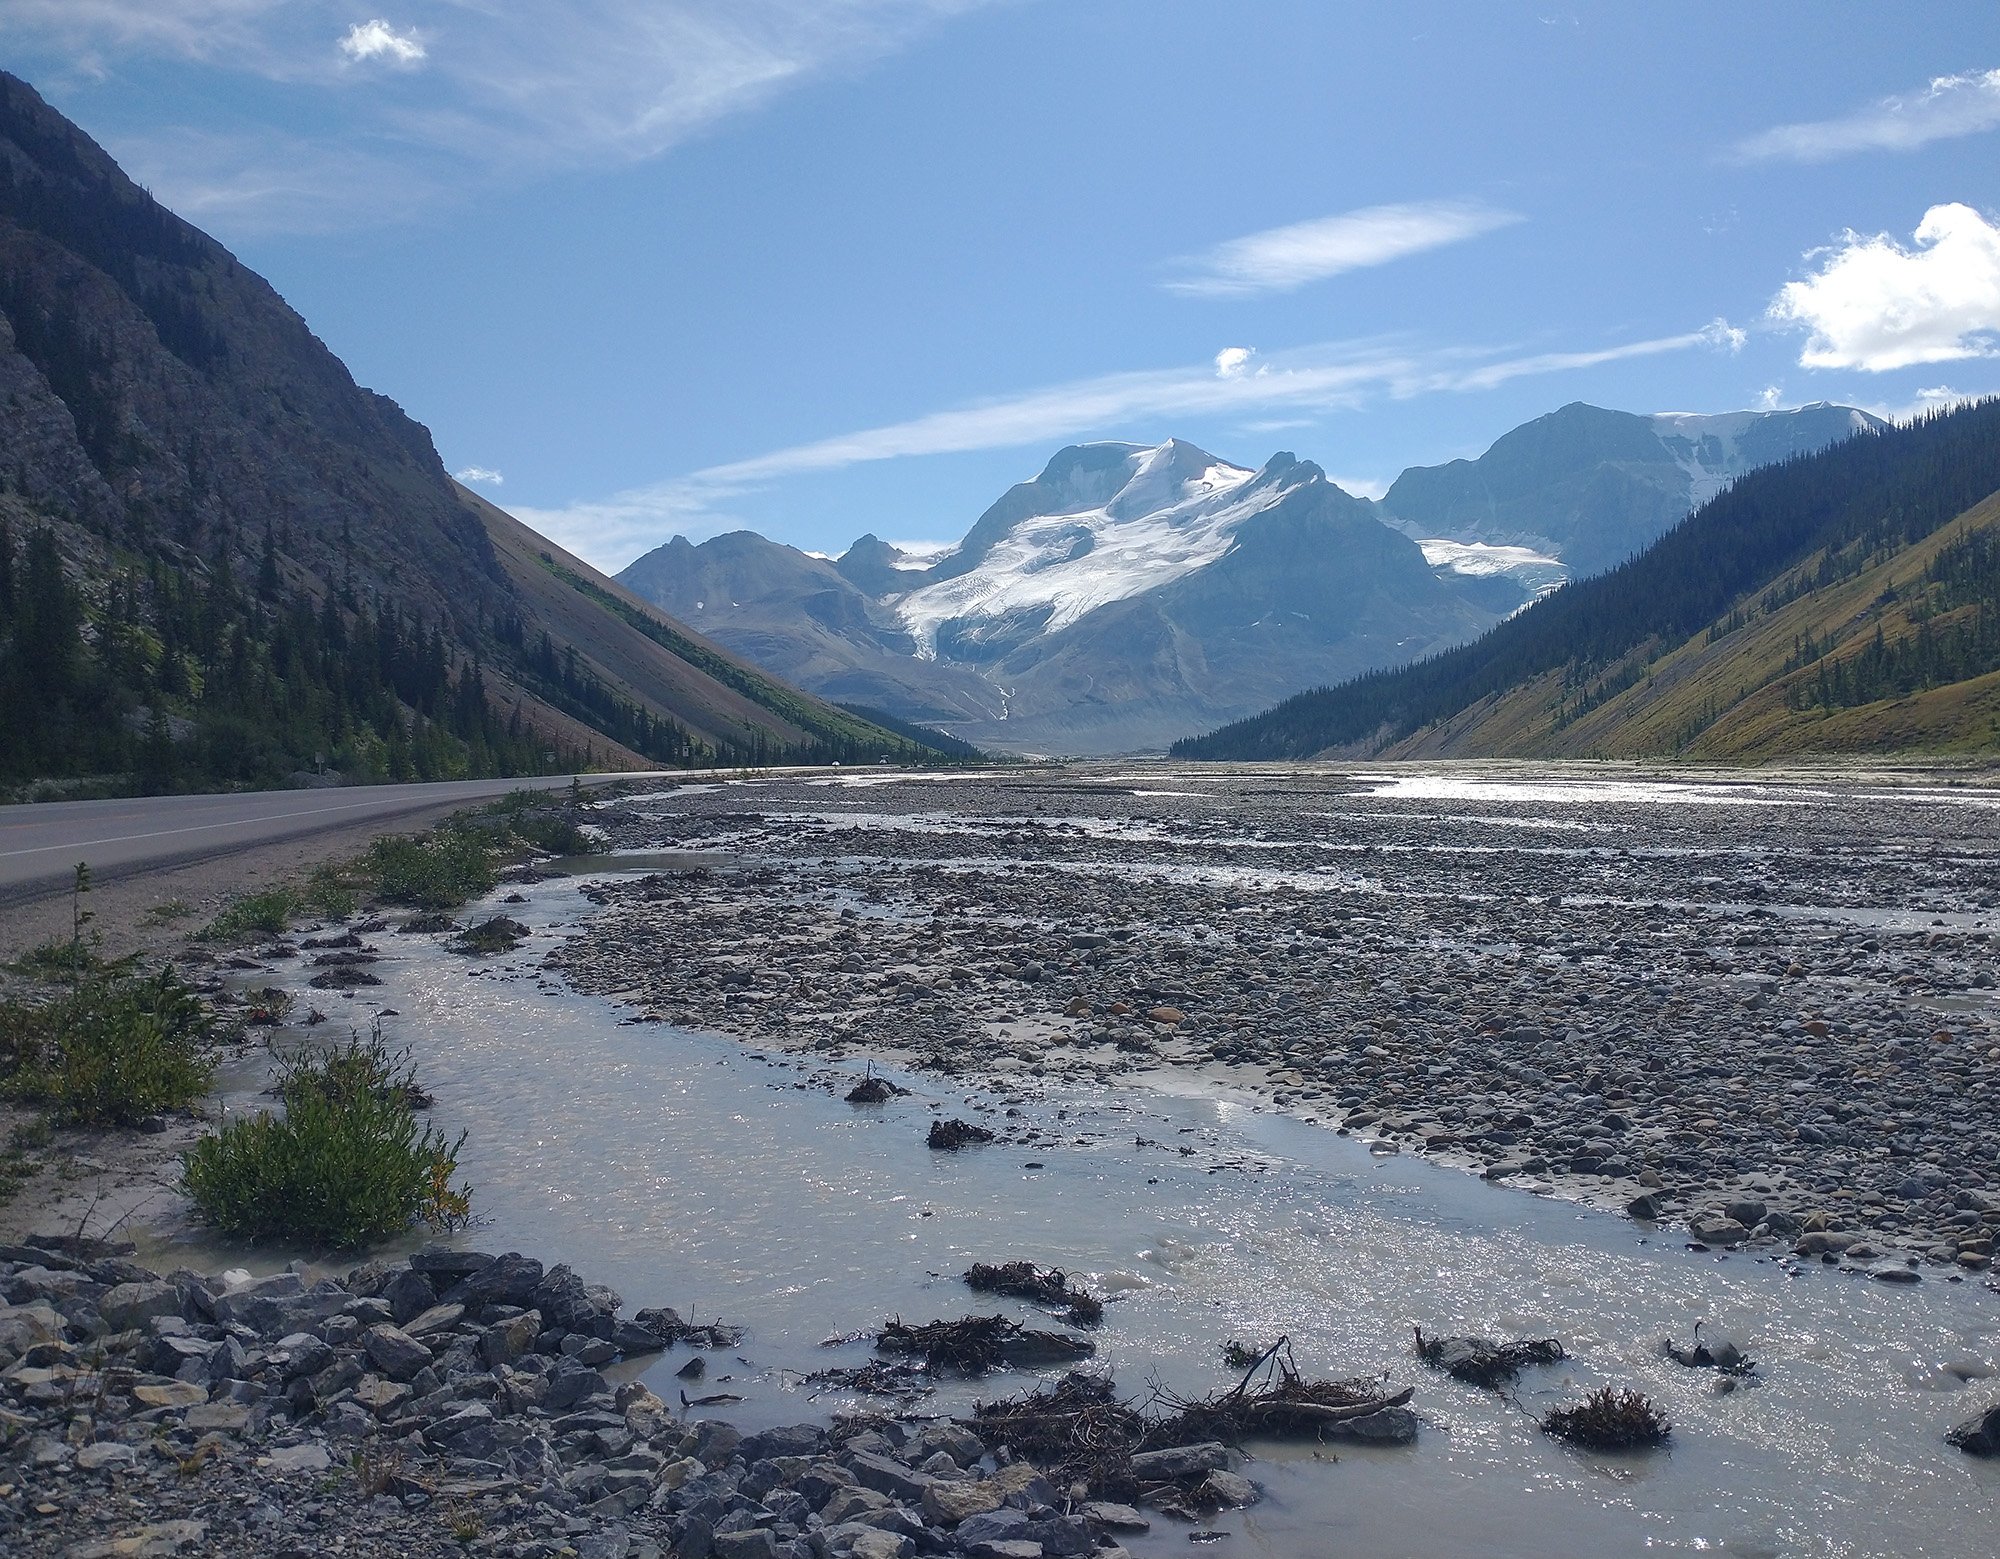 The bottom of the river / valley that leads into the Glaciers. 